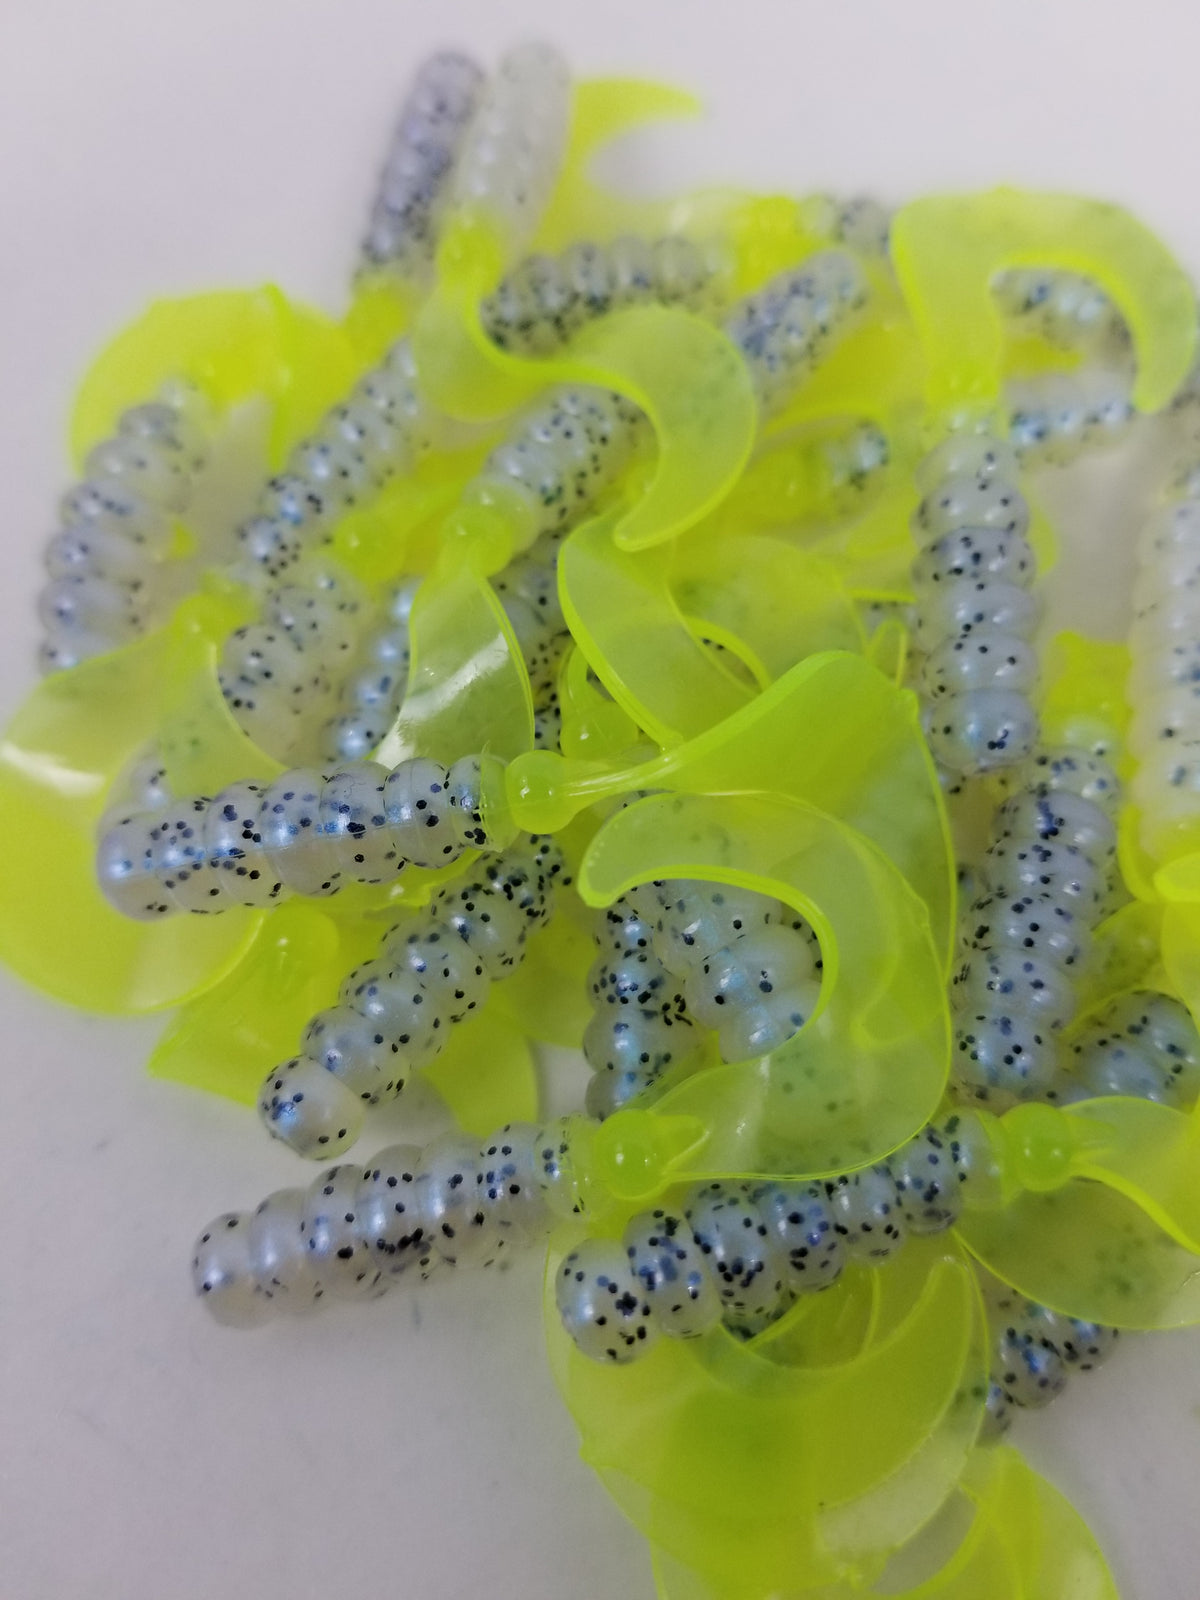 Cam's 2"(HOLOGRAM FLAKE)  Curly Tail Grub 40pc Monkey Milk & Chartreuse Curly Tail Crappie Soft Jigs  [A Cam's Exclusive]